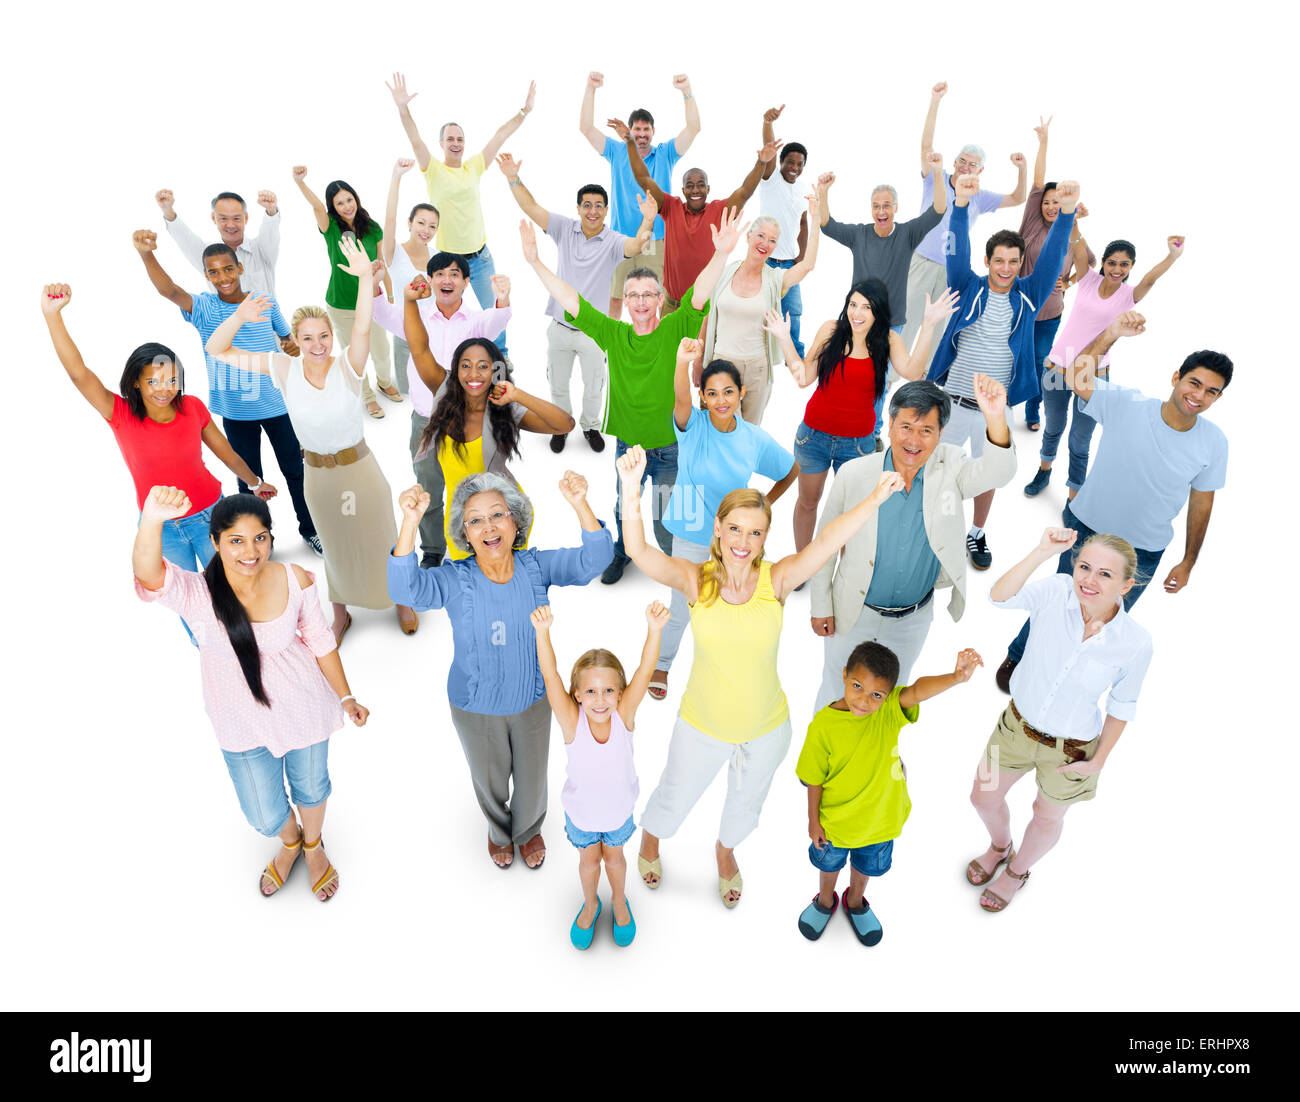 Large crowd of people cheering Stock Photo